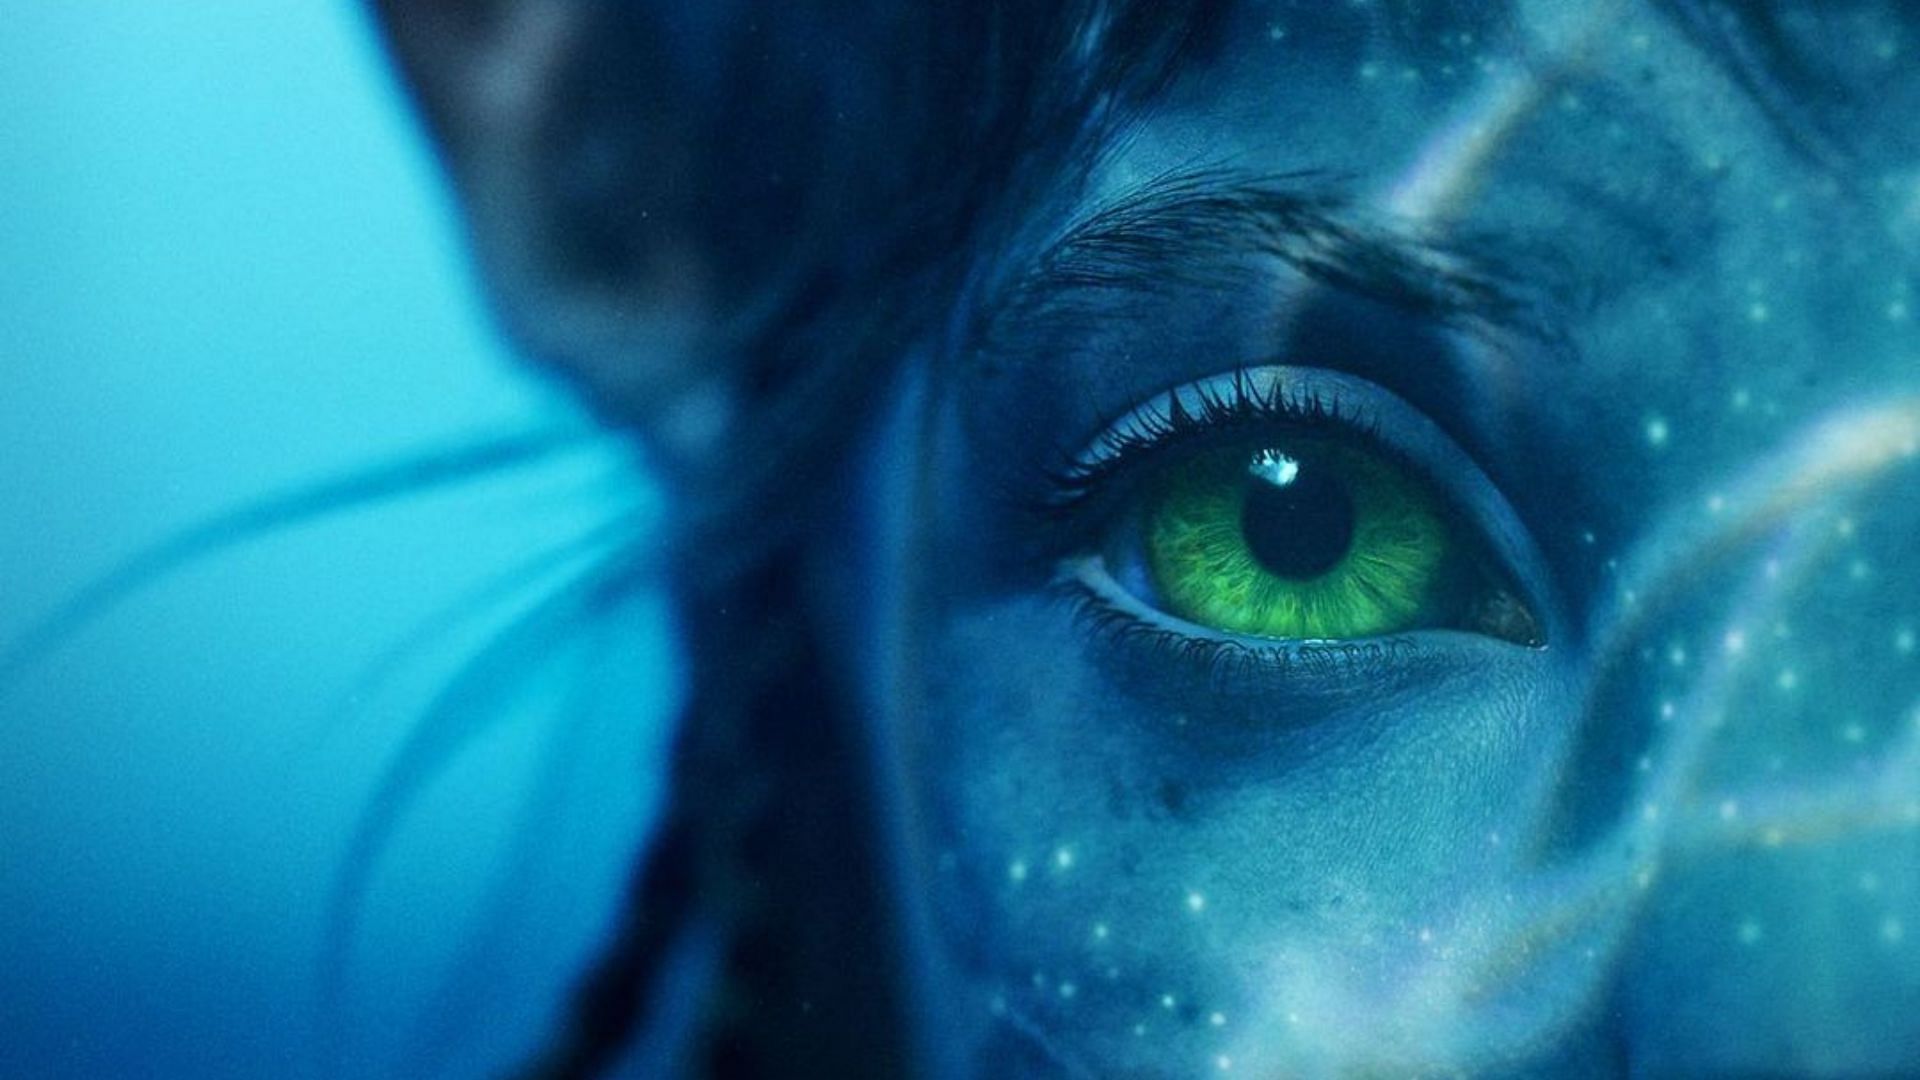 Avatar 2 is all set to premiere in December 2022 (Image Via avatar @Instagarm)